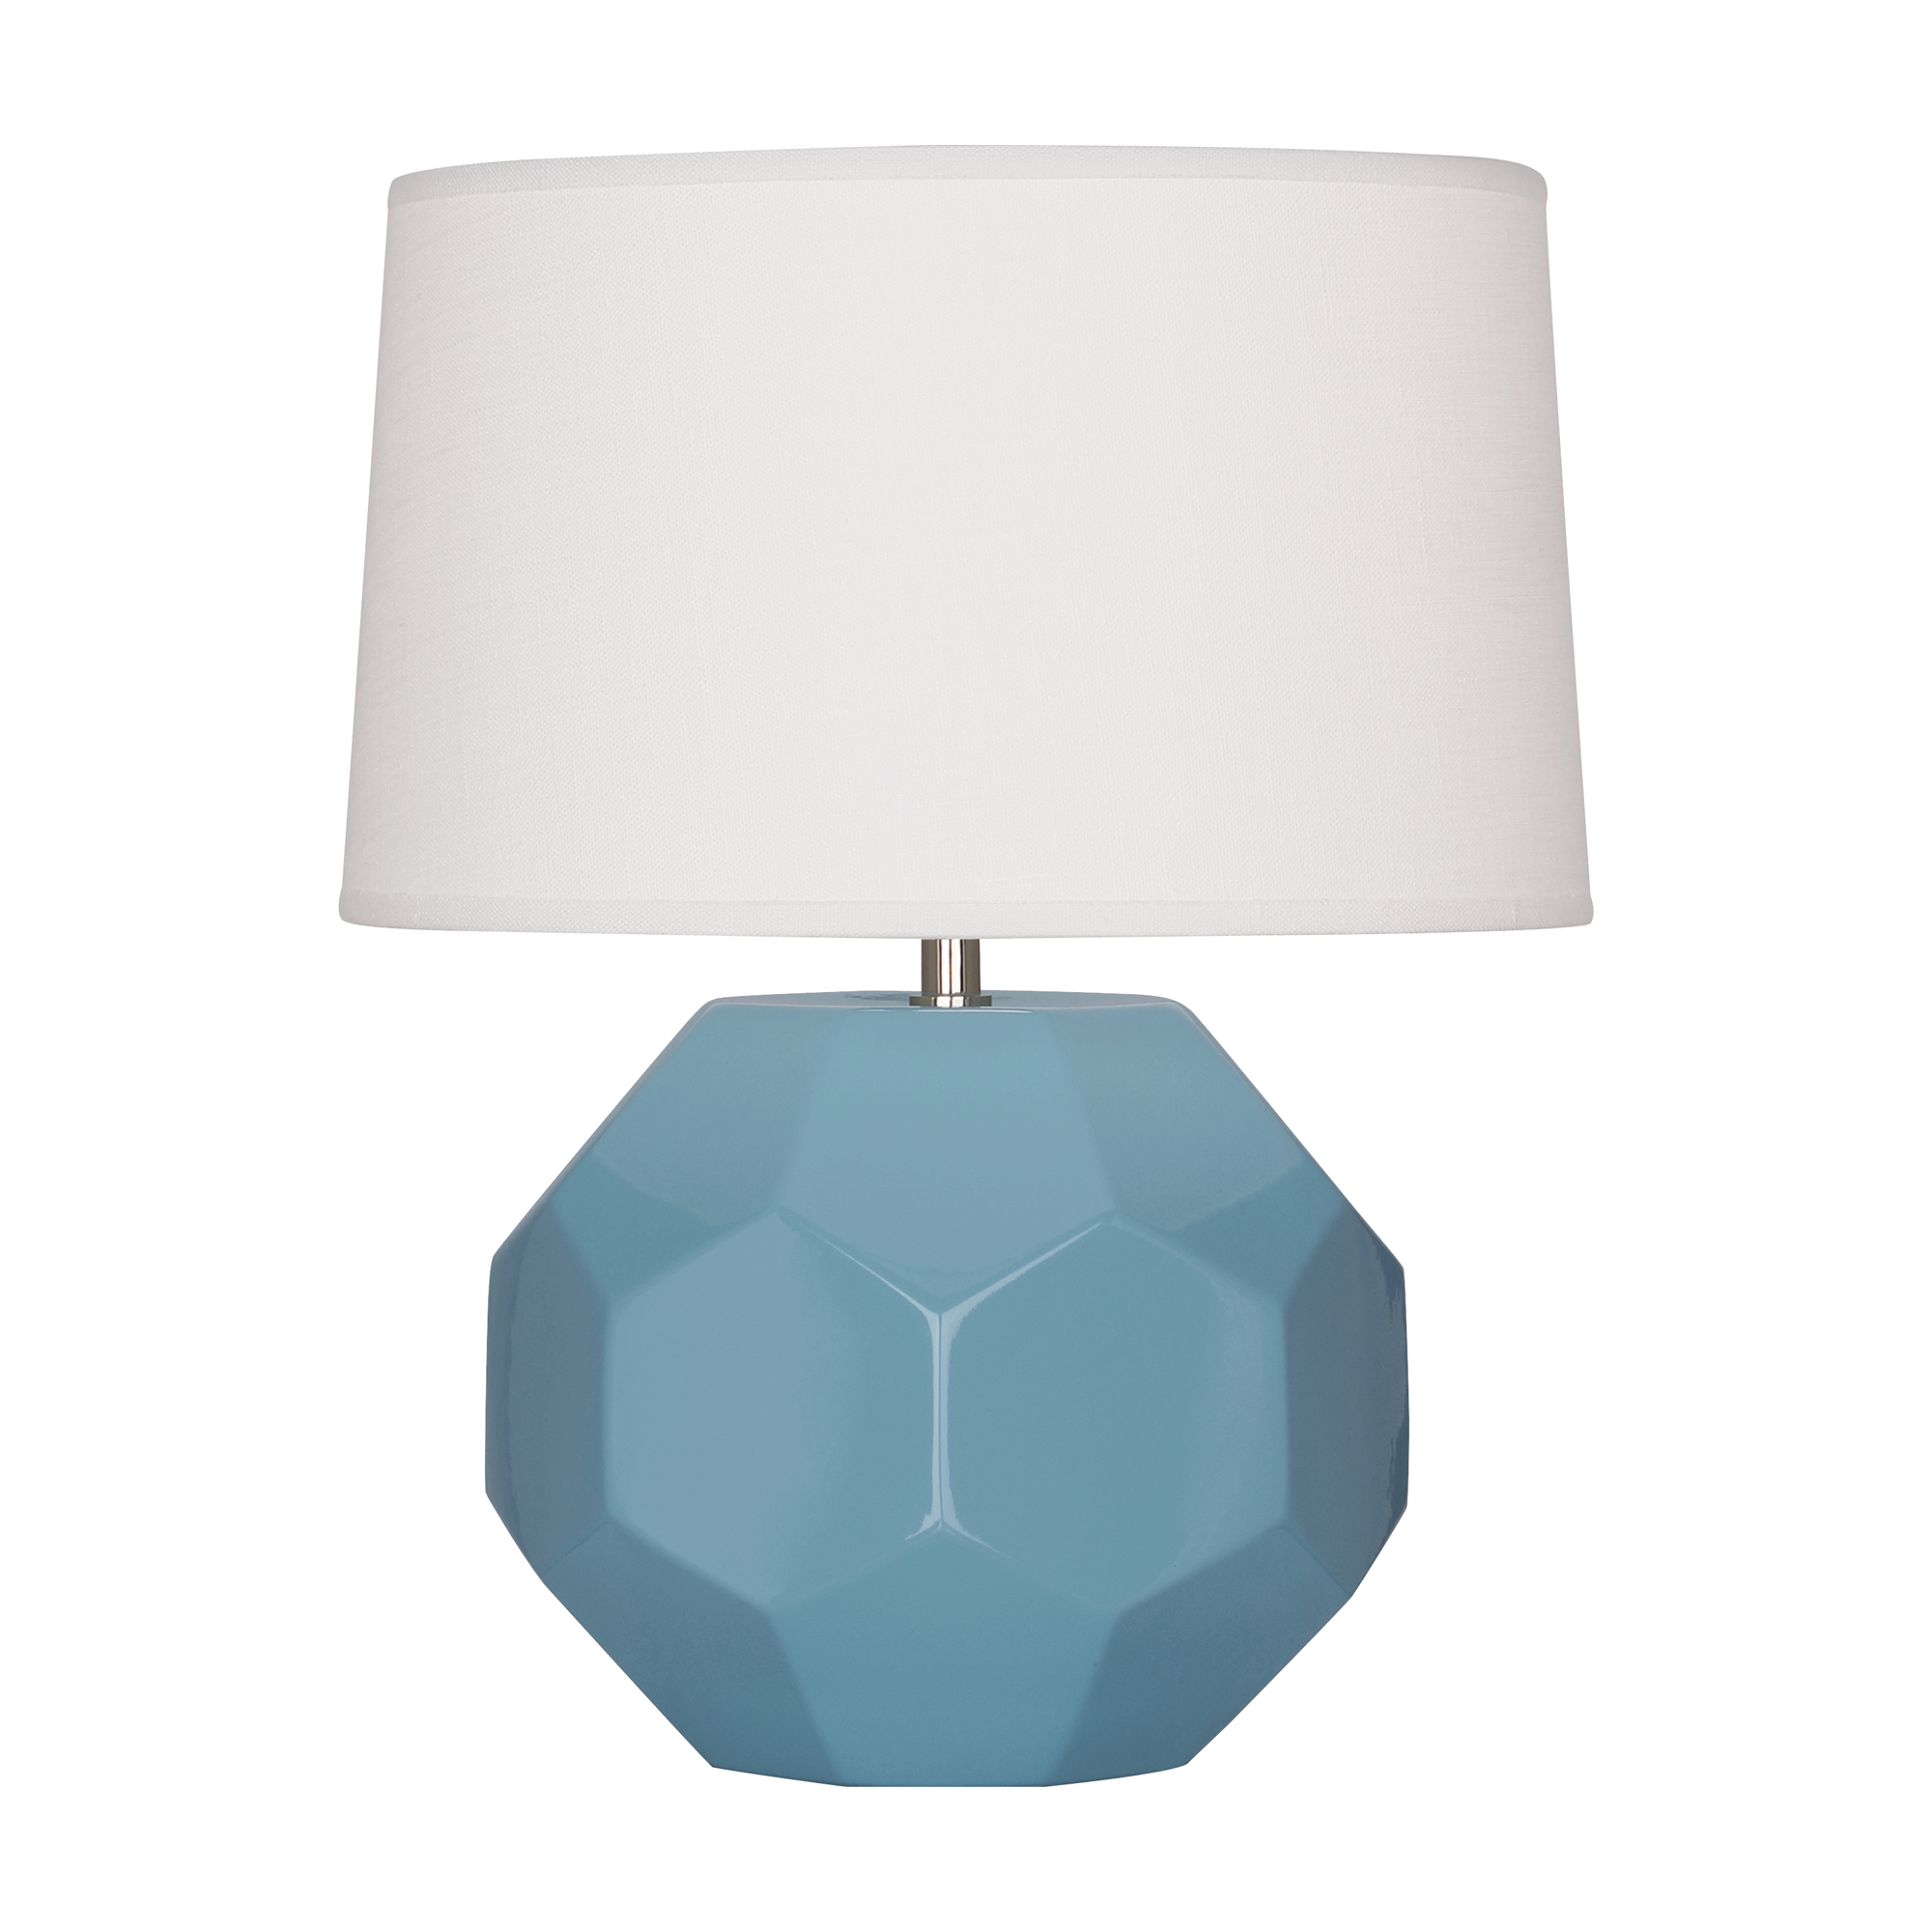 Franklin Accent Lamp Style #OB02